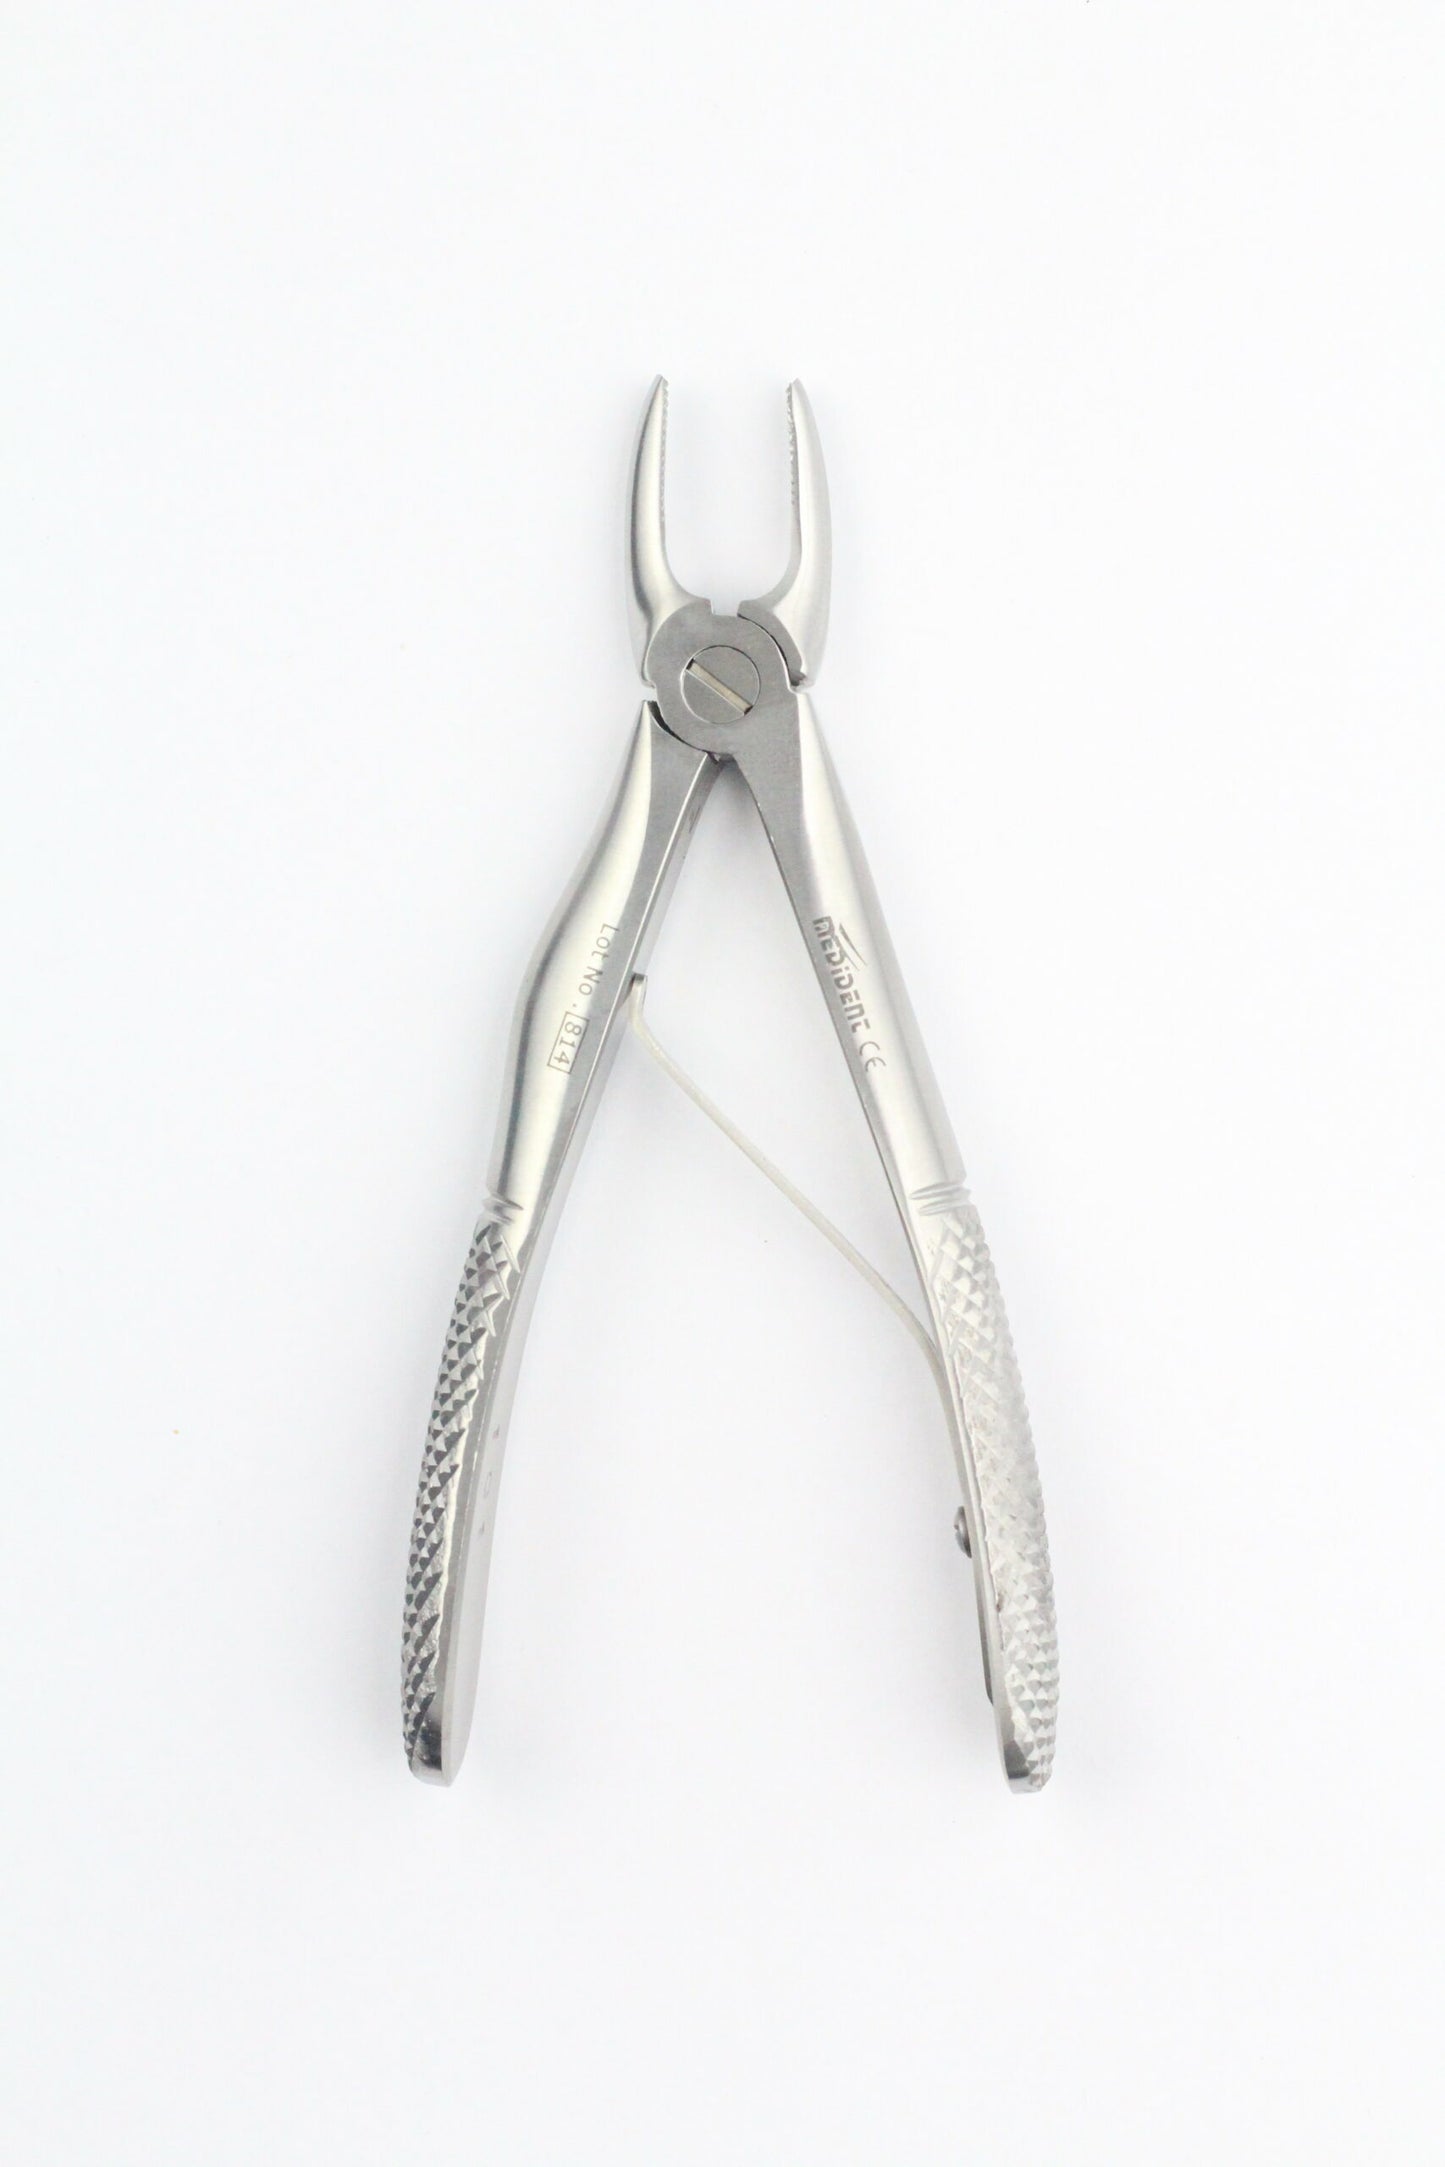 SMALL EXTRACTING FORCEPS FIG 101 UPPER INCISORS cod 1000-2